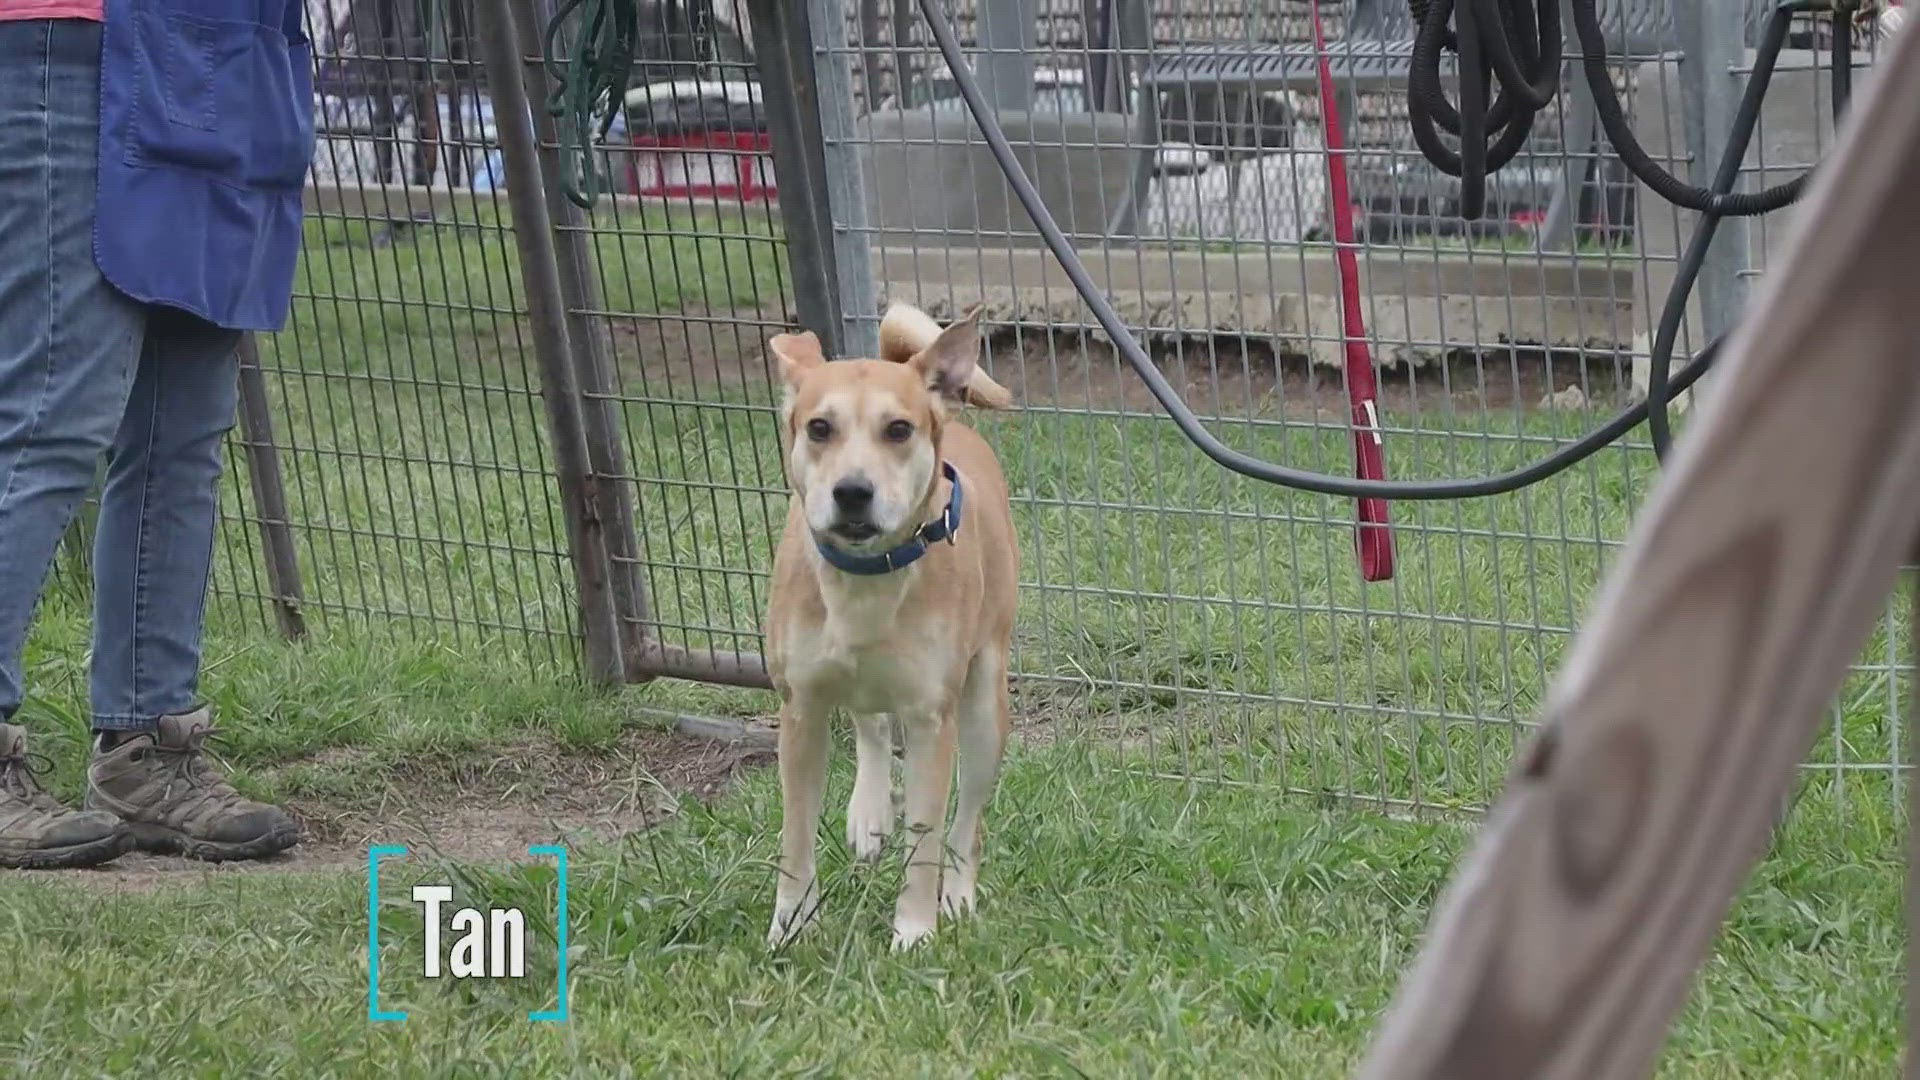 Tan is looking for his fur-ever home!